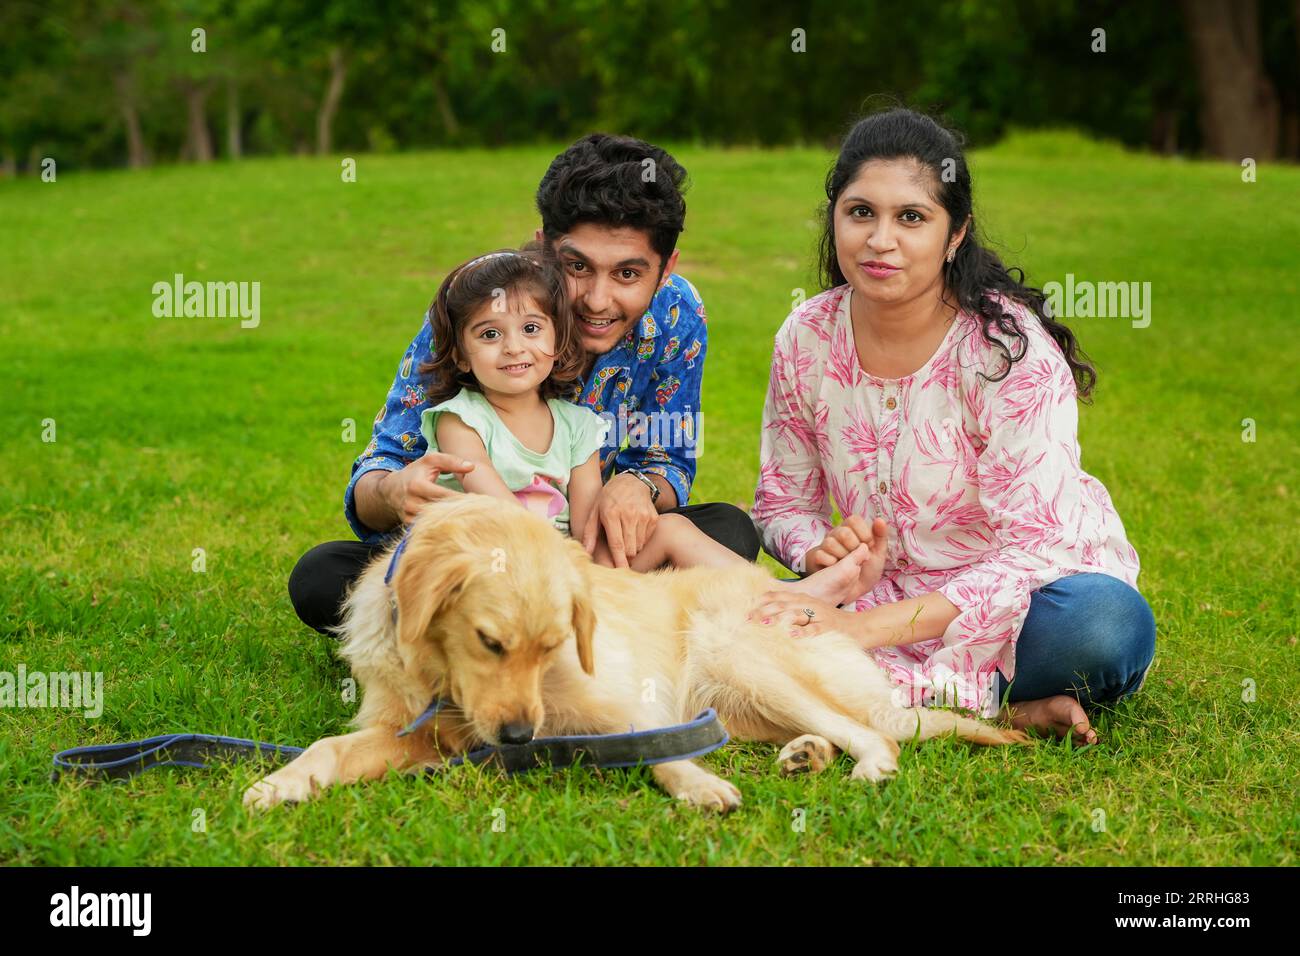 Happy young indian family having fun together at summer park. Mother, father and daughter with labrador dog in garden. Stock Photo